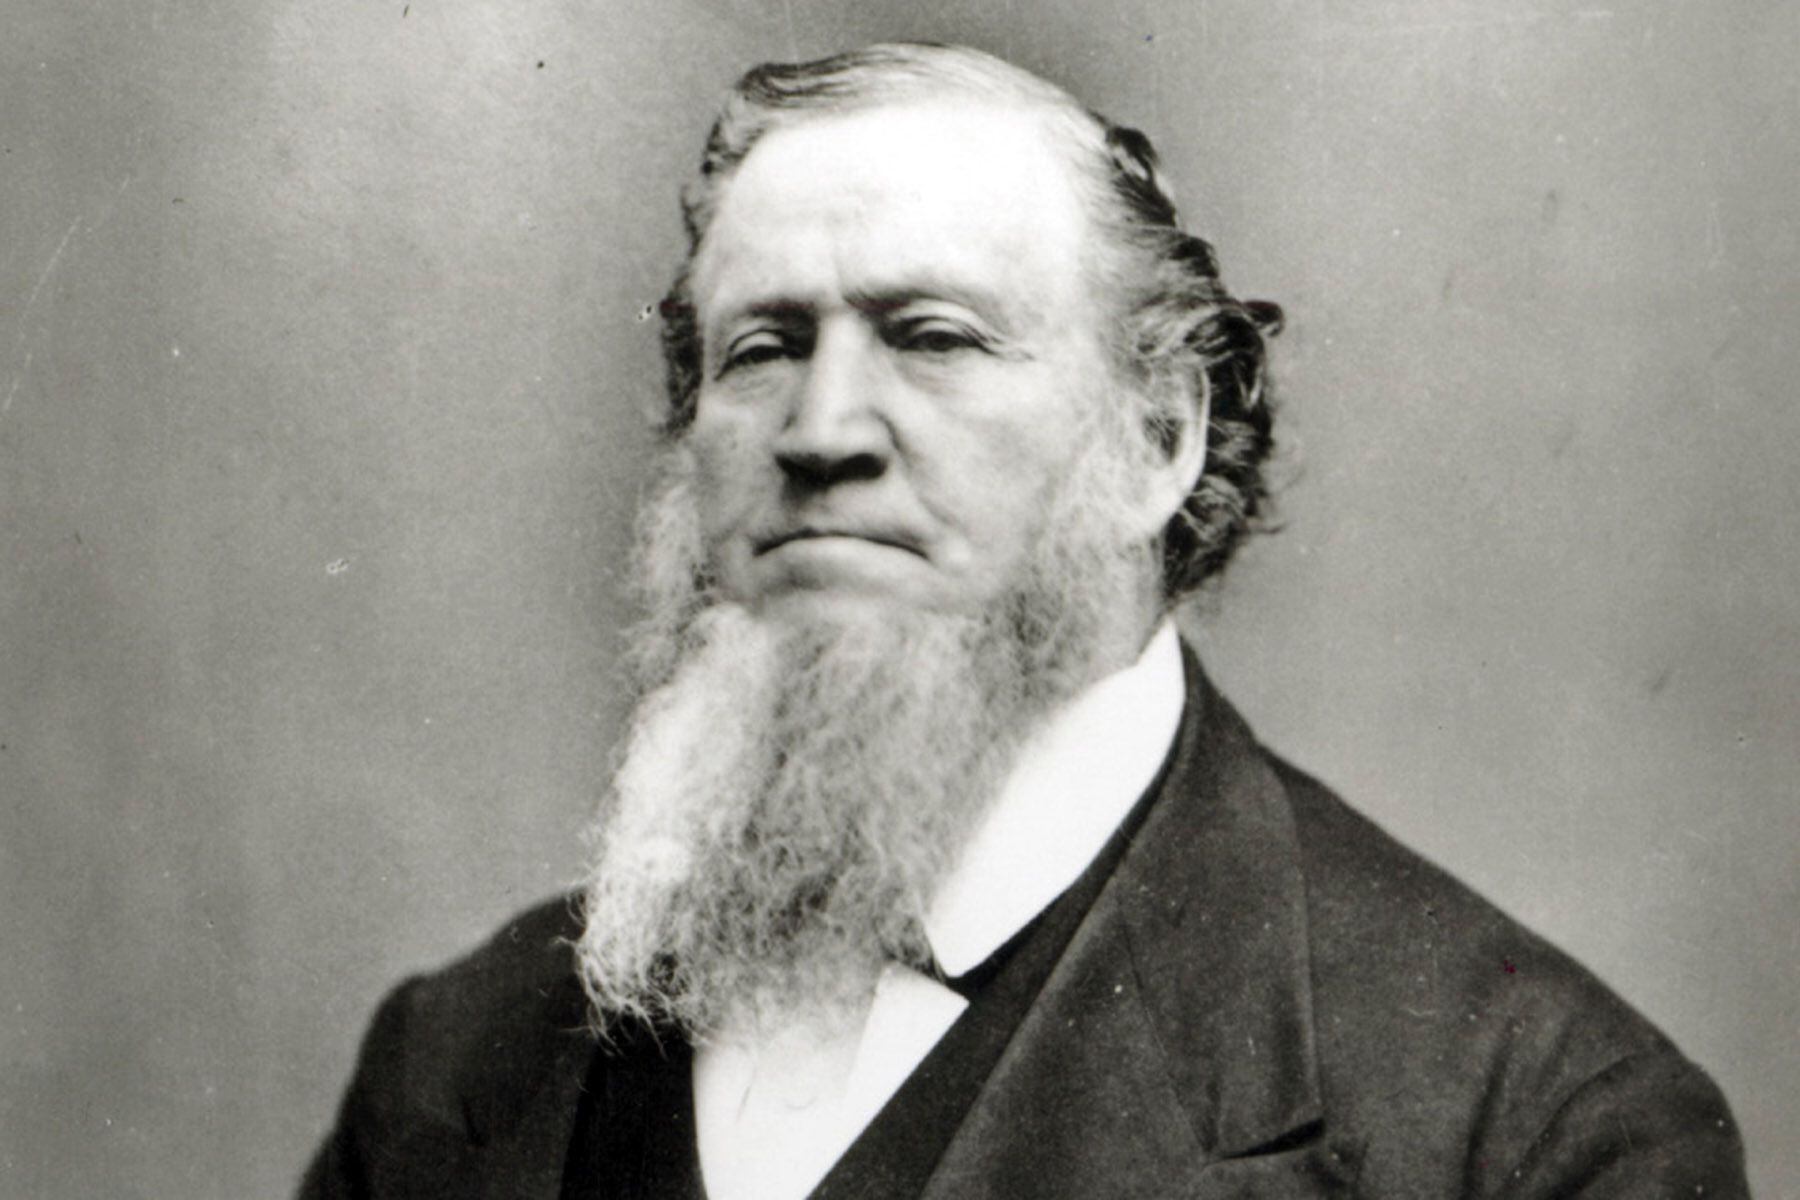 (Tribune file photo) Brigham Young, second president of The Church of Jesus Christ of Latter-day Saints, famously wore a beard later in life.